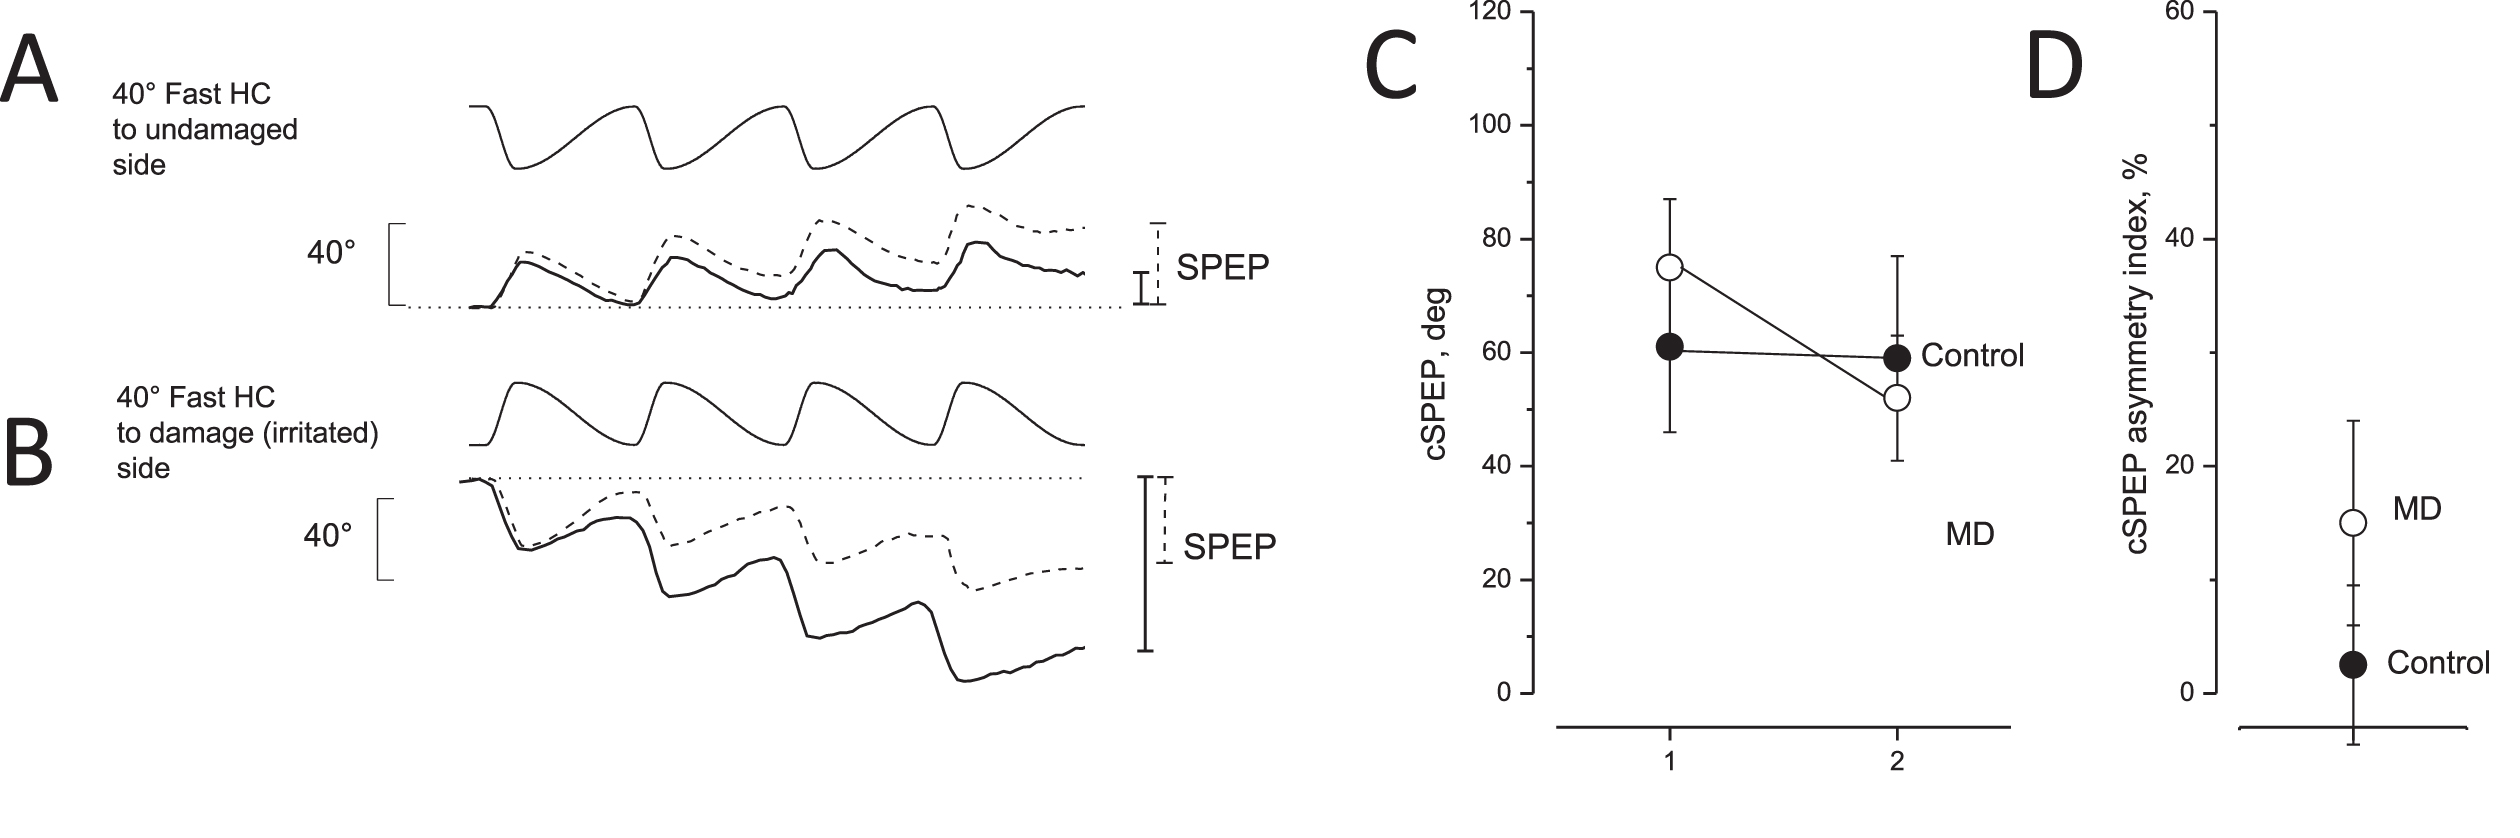 Eye movement recording during asymmetric rotation in response to opposite directed asymmetric rotation and asymmetric index in unaffected and MD patients. A, B: Slow phase eye position (SPEP) in response to opposite directed sequence of four cycles of asymmetric rotation with a fast half cycle toward the lesion side (A) and the healthy side (B). Upper traces: asymmetric rotation; and lower traces: SPEP (solid line: MD patients, dashed line: controls). Cumulative eye position at the end of rotation is indicated by vertical bars on the right (solid line: MD patients; dashed line: controls). Note that the cumulative SPEP of MD patients was smaller in A and greater in B compared with the controls. C: Cumulative SPEP (cSPEP) (mean and SD) of unaffected (control, filled circle) and MD patients (open circles) in response to opposite directed asymmetric rotation: fast half cycle to healthy or irritated side (left) versus fast half cycle to lesion or side not irritated (right). Note that controls did not show a different cumulative SPEP in contrast to MD patients. D: cSPEP asymmetry index in unaffected (control, filled circle) and in MD patients (open circles) in response to the opposite directed asymmetric rotation.